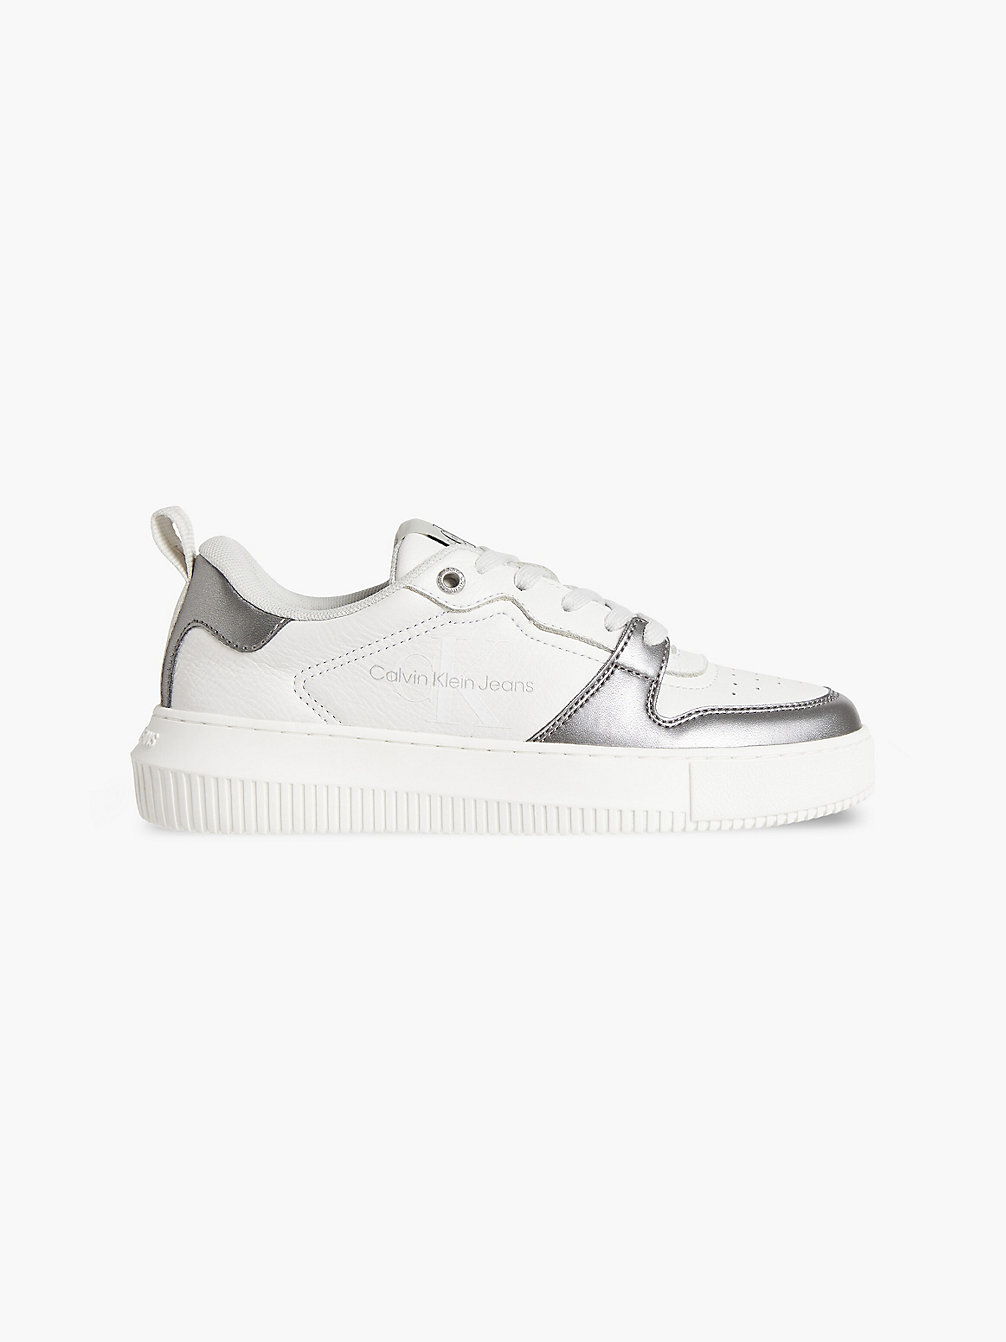 WHITE/SILVER Leather Trainers undefined women Calvin Klein